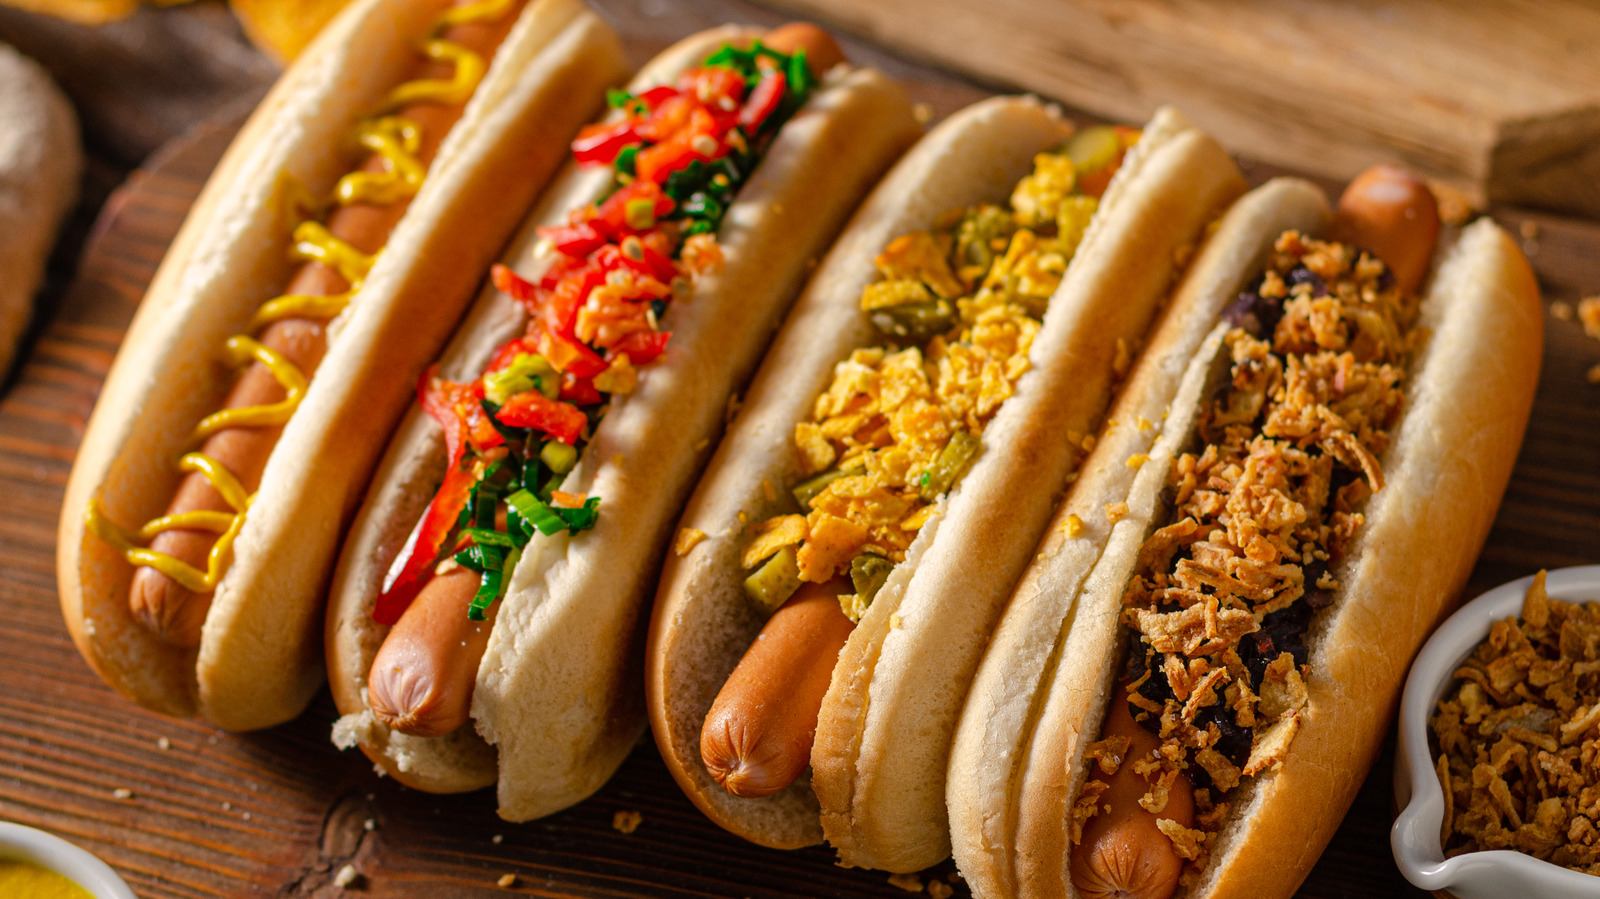 5 Classic Spots to Eat Bright Leaf Hot Dogs